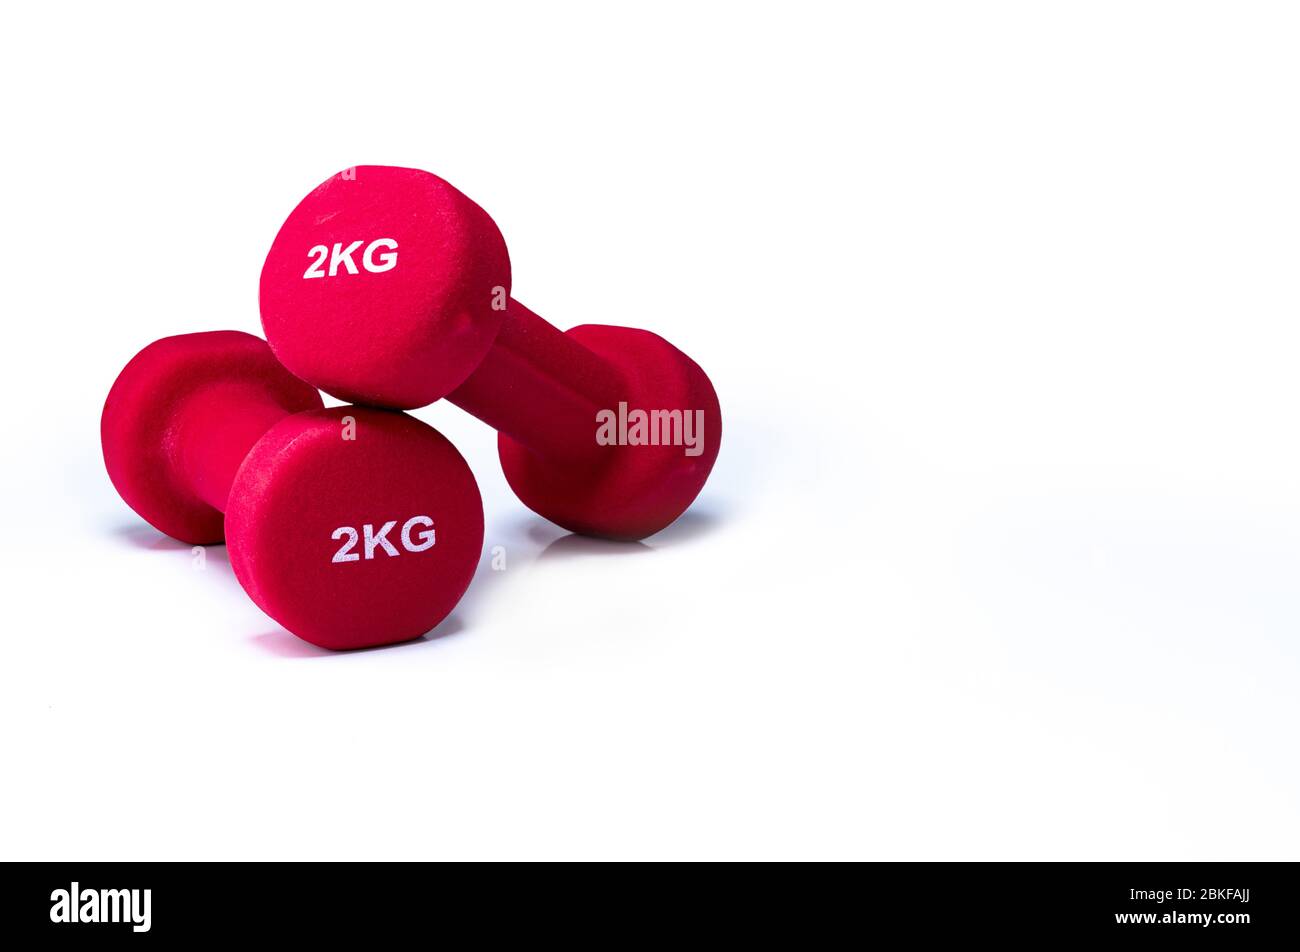 Set of red dumbbells isolated on white background. A pair of red neoprene dumbbells. Home gym equipment for exercise at home. Weight training Stock Photo